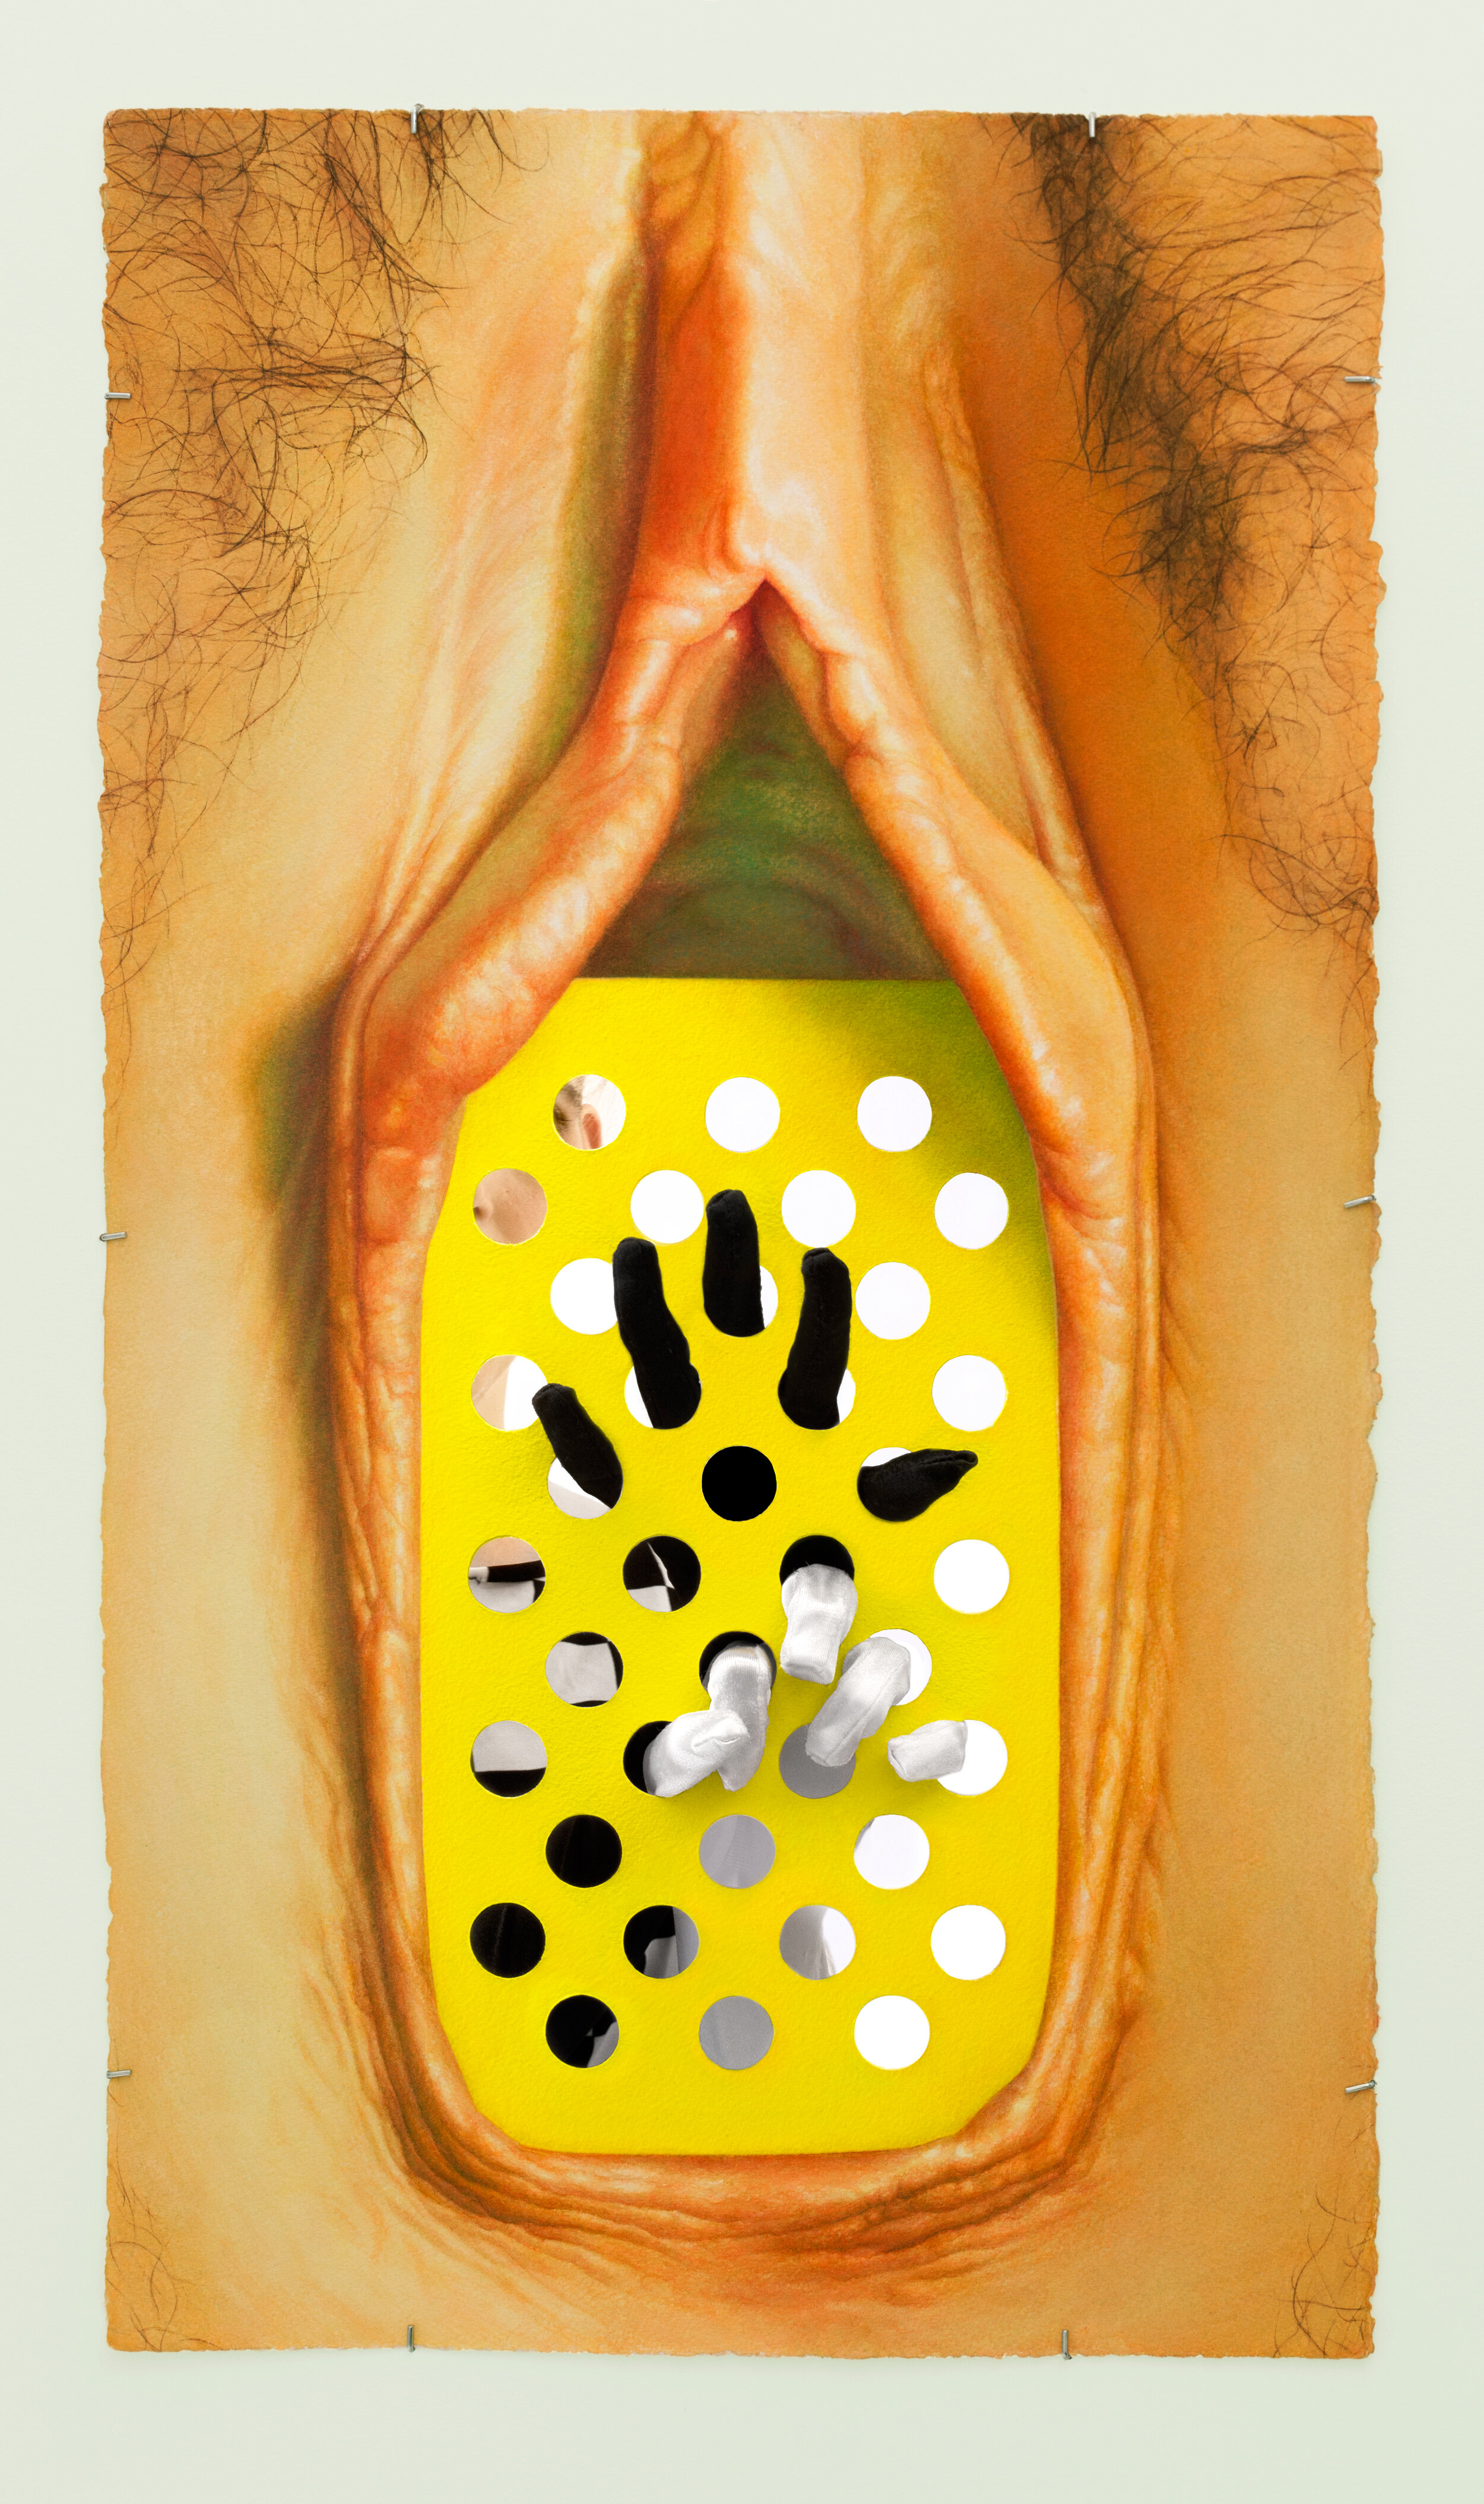   {perforated yellow, vagina} ,  watercolor on paper,  30” x 17”, activated by fingers in performance  